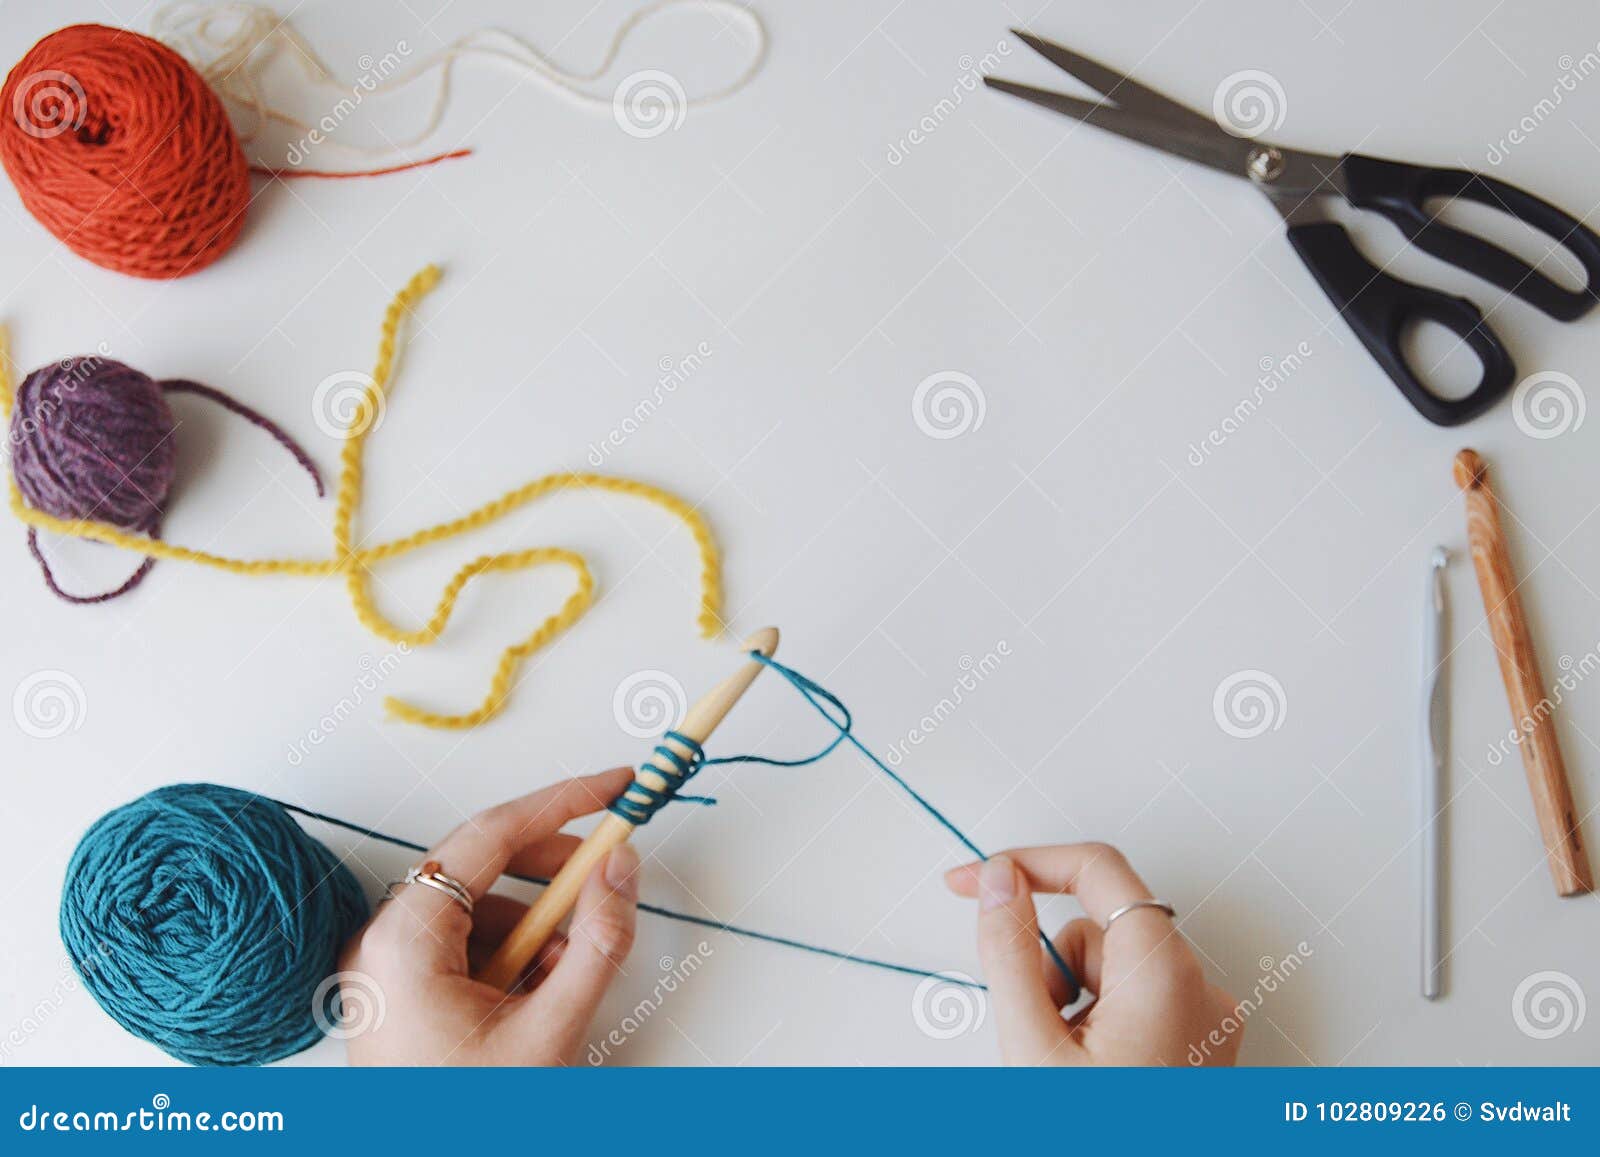 153 Different Crochet Hooks Stock Photos - Free & Royalty-Free Stock Photos  from Dreamstime